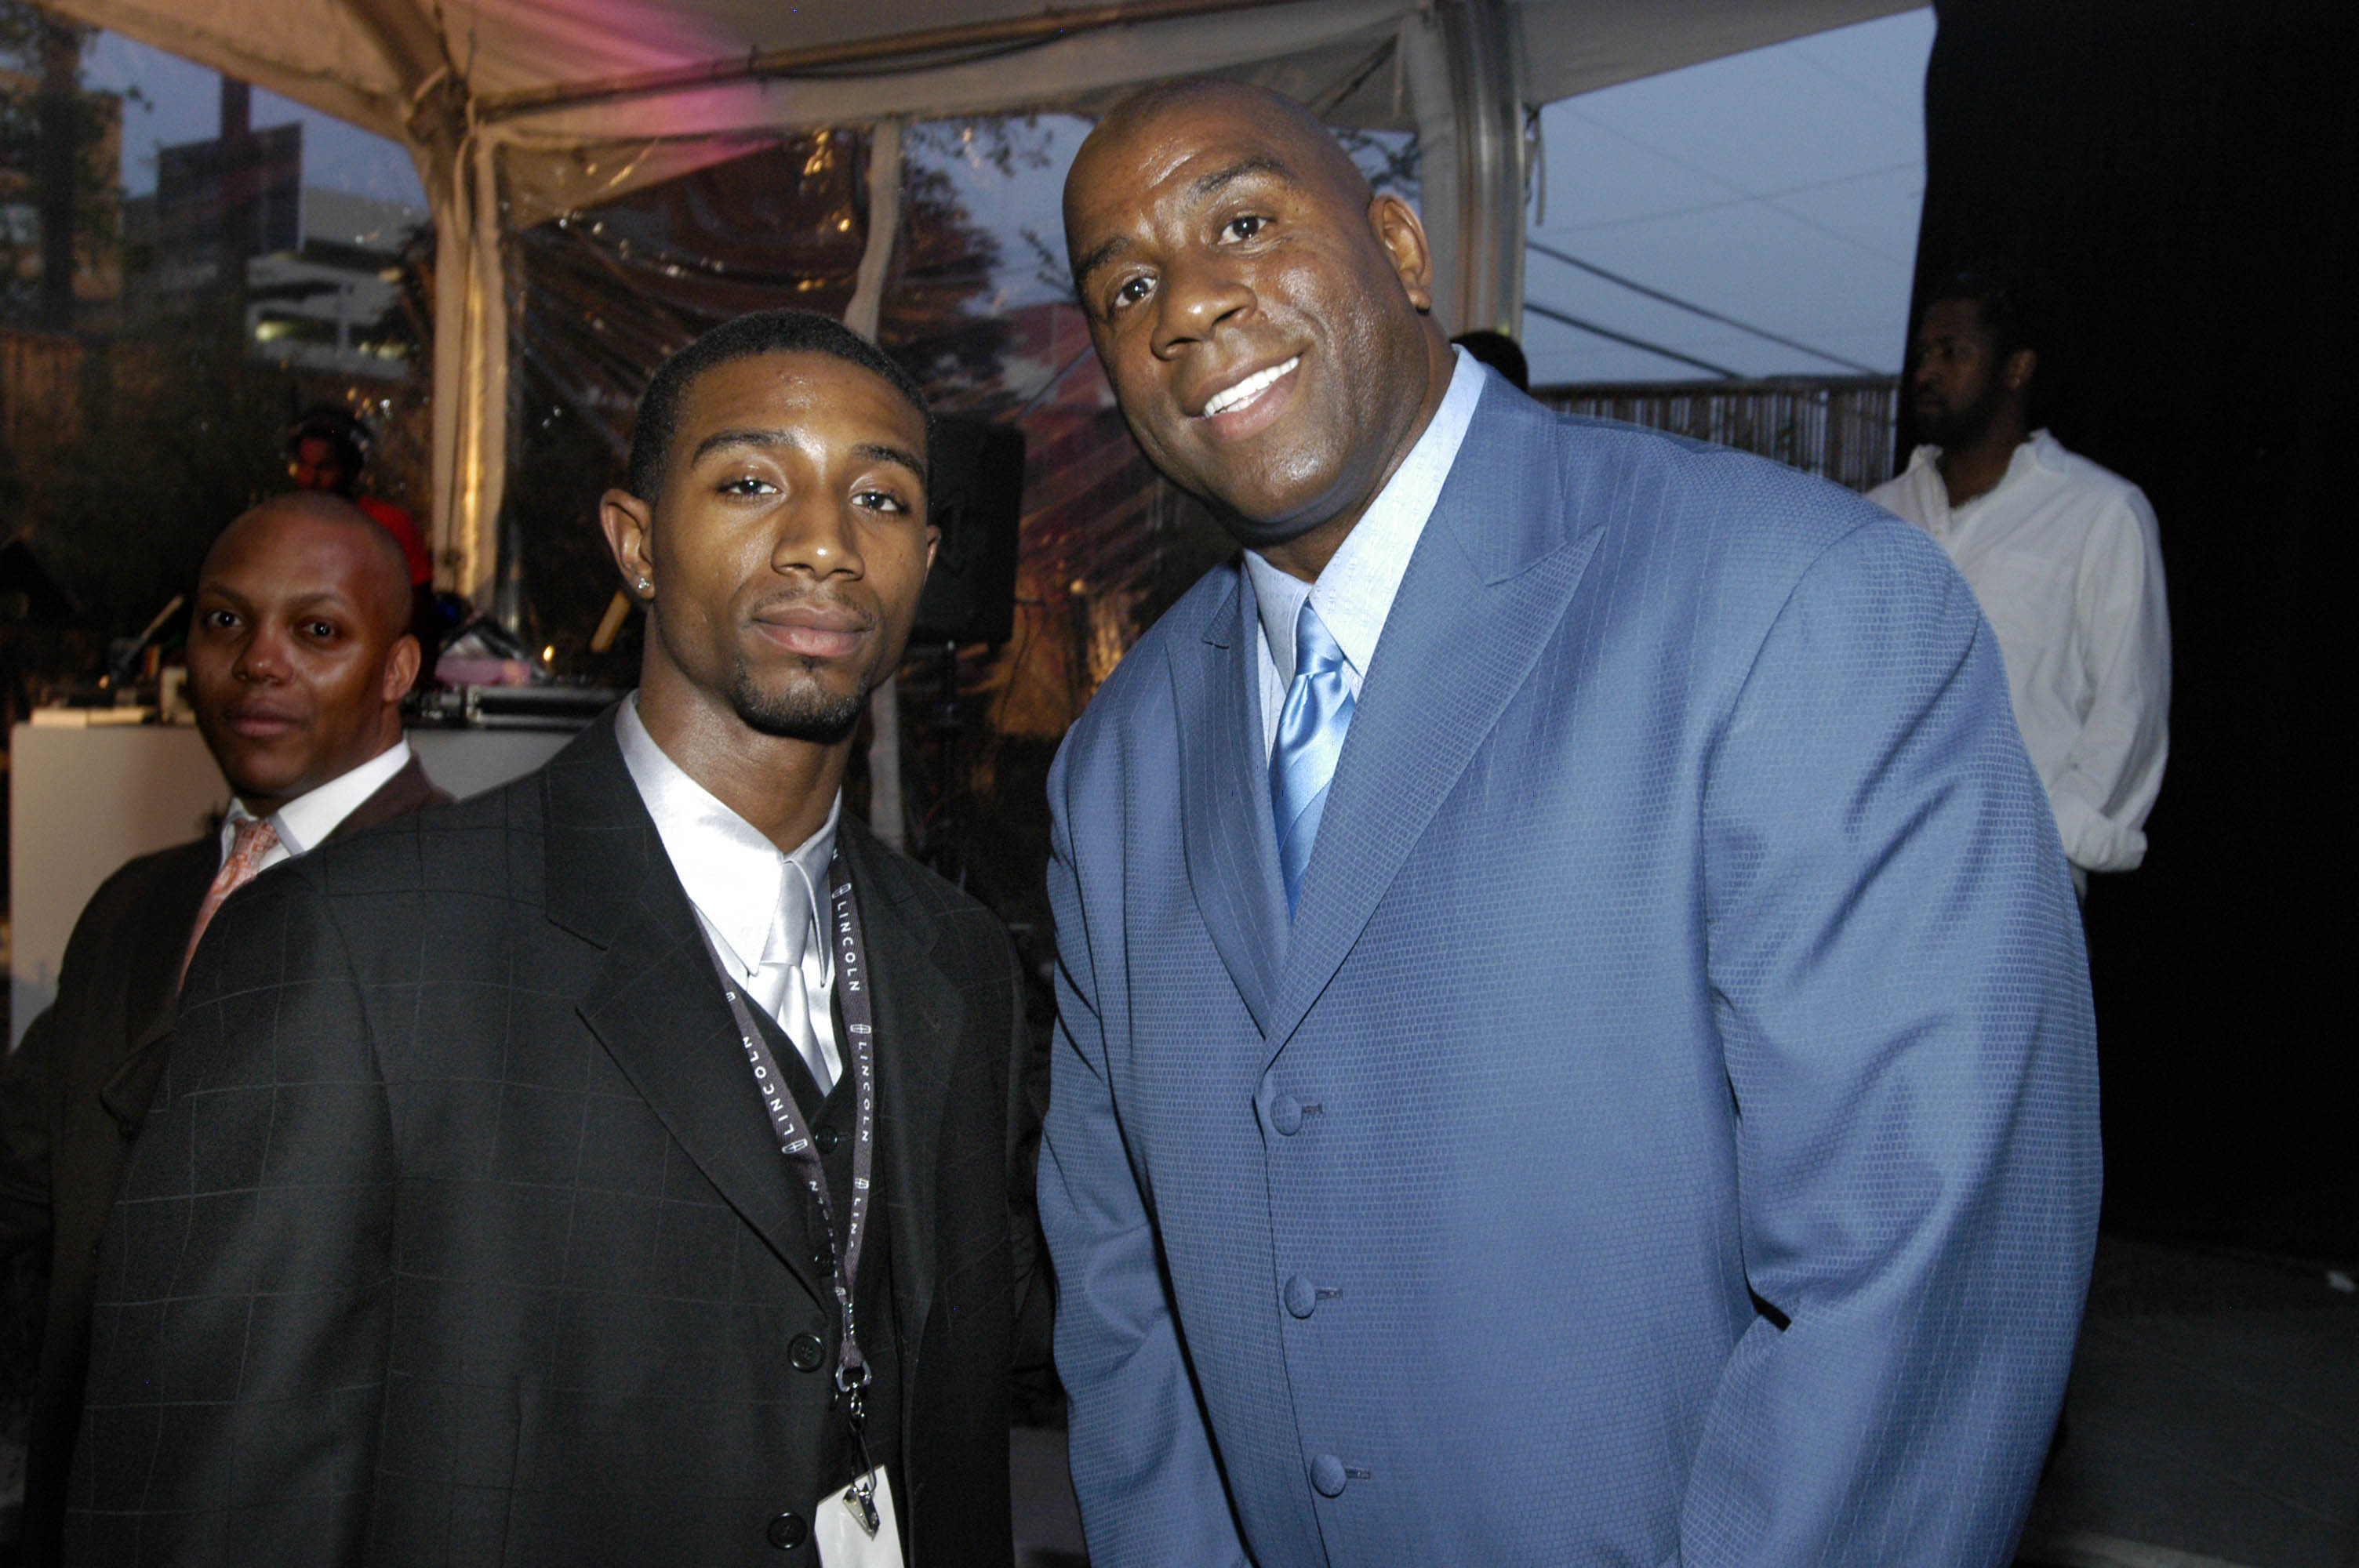 Andre Johnson and Earvin "Magic" Johnson during Lincoln Luxury Event with Earvin "Magic" Johnson and New Edition at Compound in Atlanta, Georgia | Photo: GettyImages